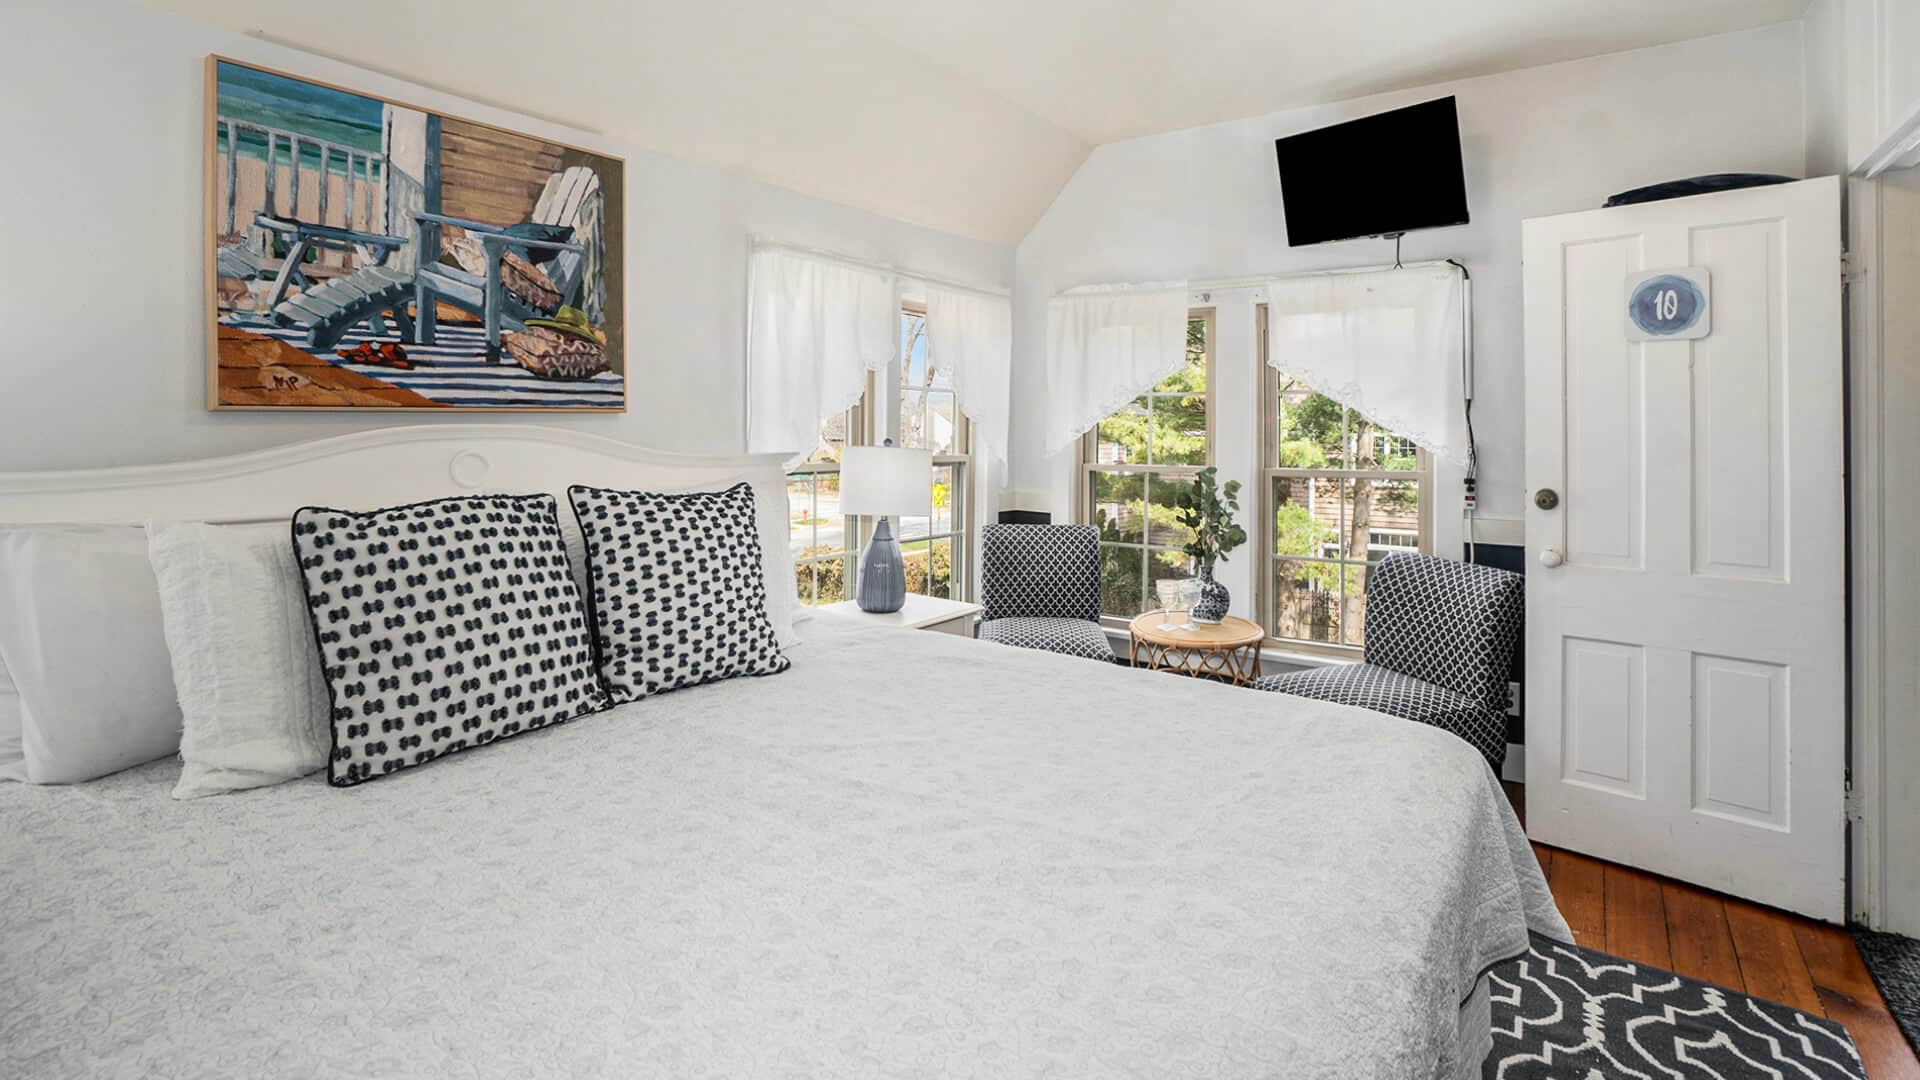 A bedroom with a bed with white bedding, blue accent pillows, wood floors and a sitting area in the corner along bright windows with 2 plush chairs and a small table between them, along with a flat screen TV on the wall above the windows. The #10 on the door.